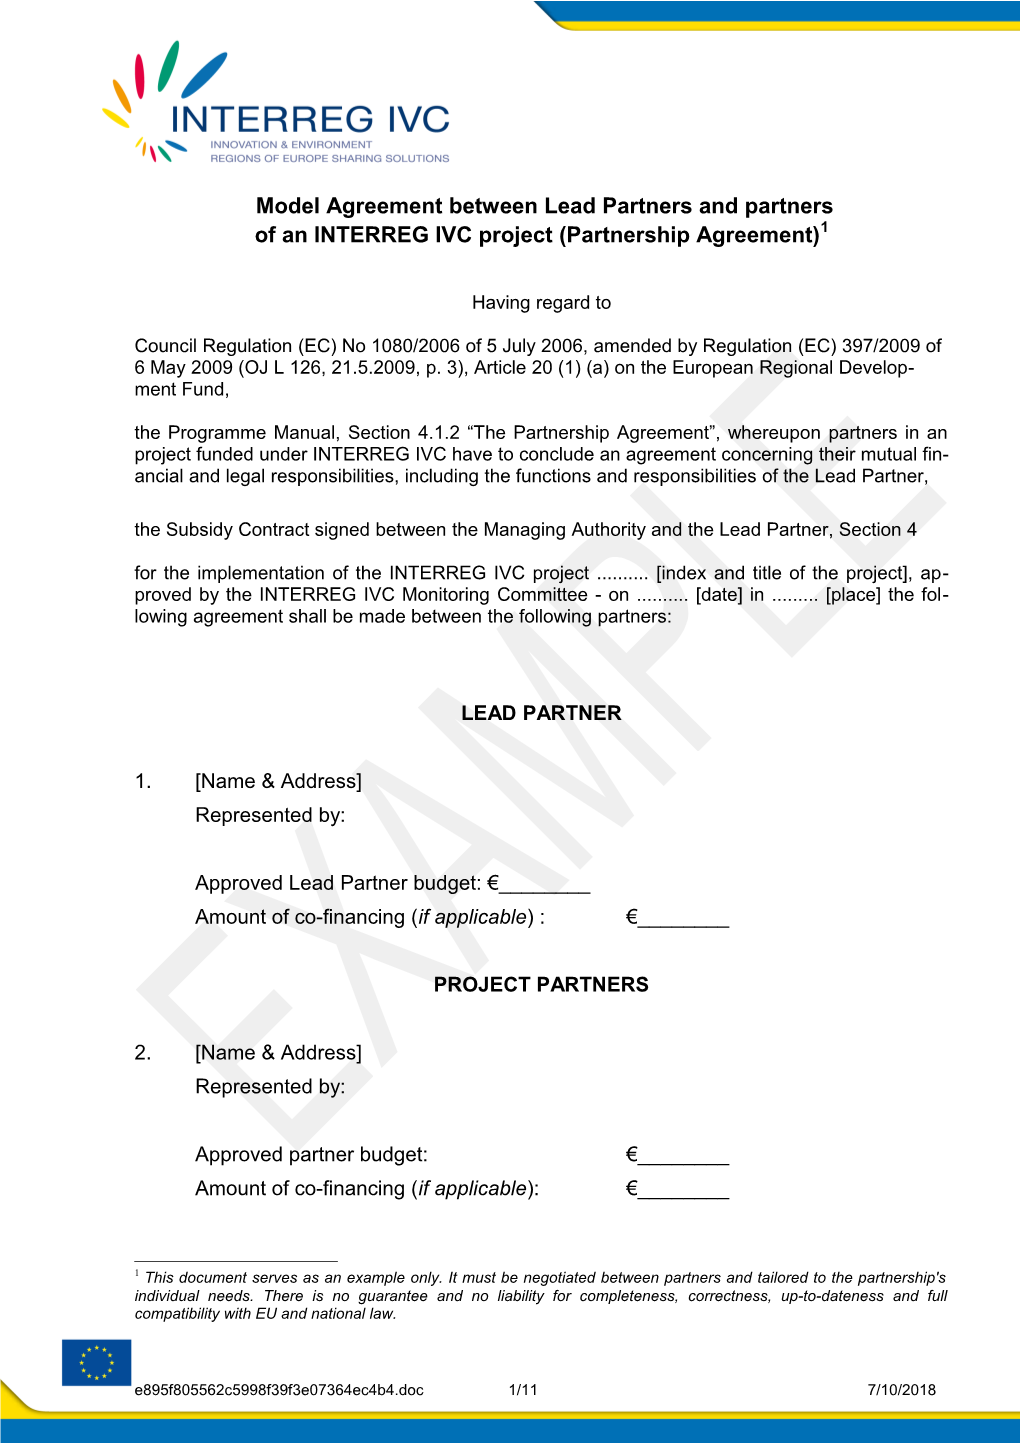 Model Agreement Between Lead Partners and Partners